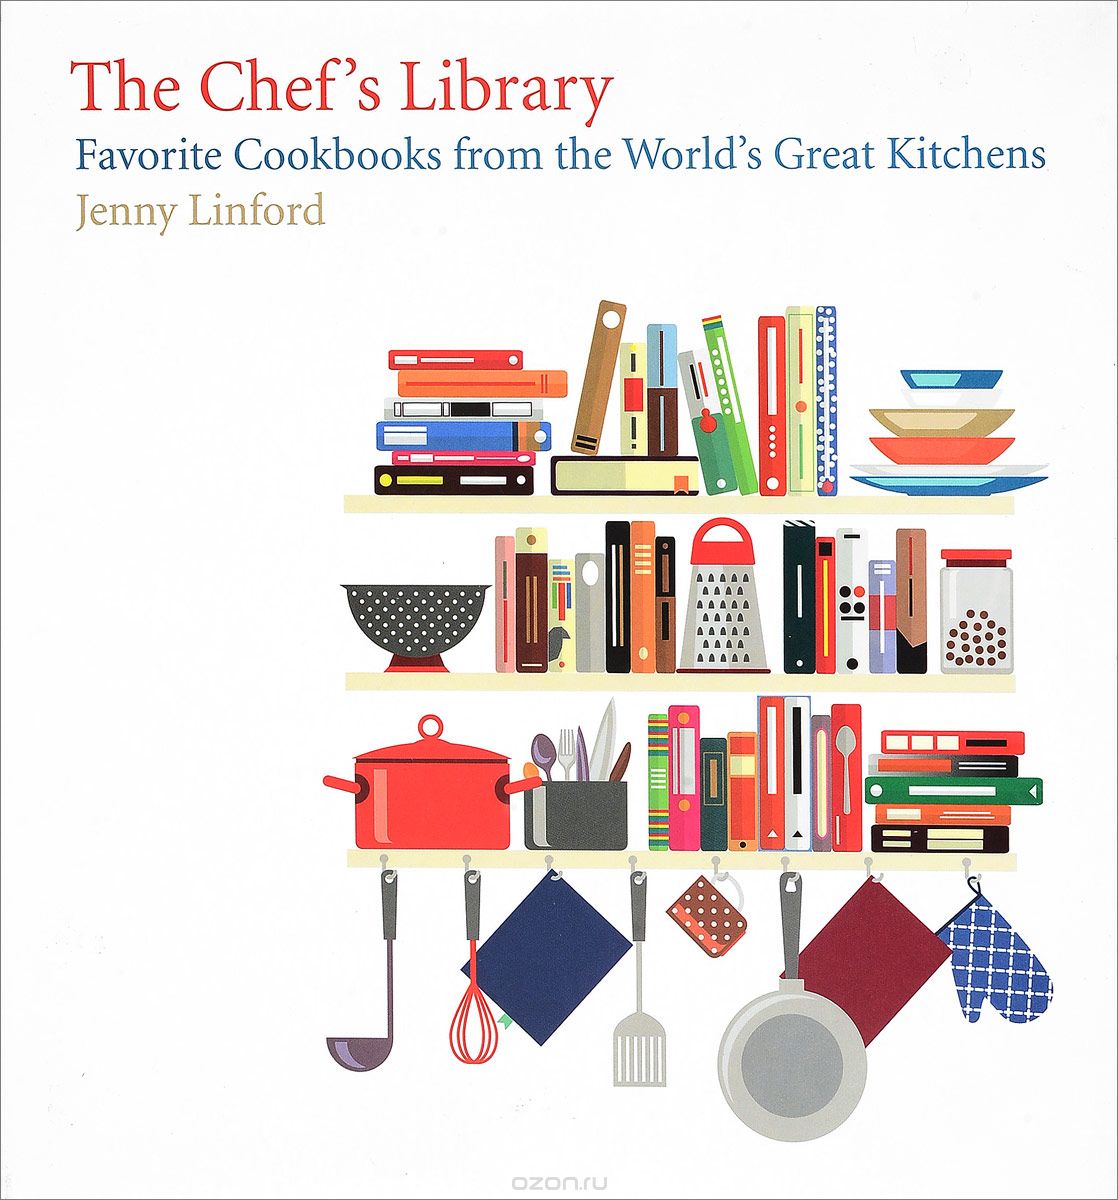 Скачать книгу "The Chef's Library: Favorite Cookbooks from the World's Great Kitchens"